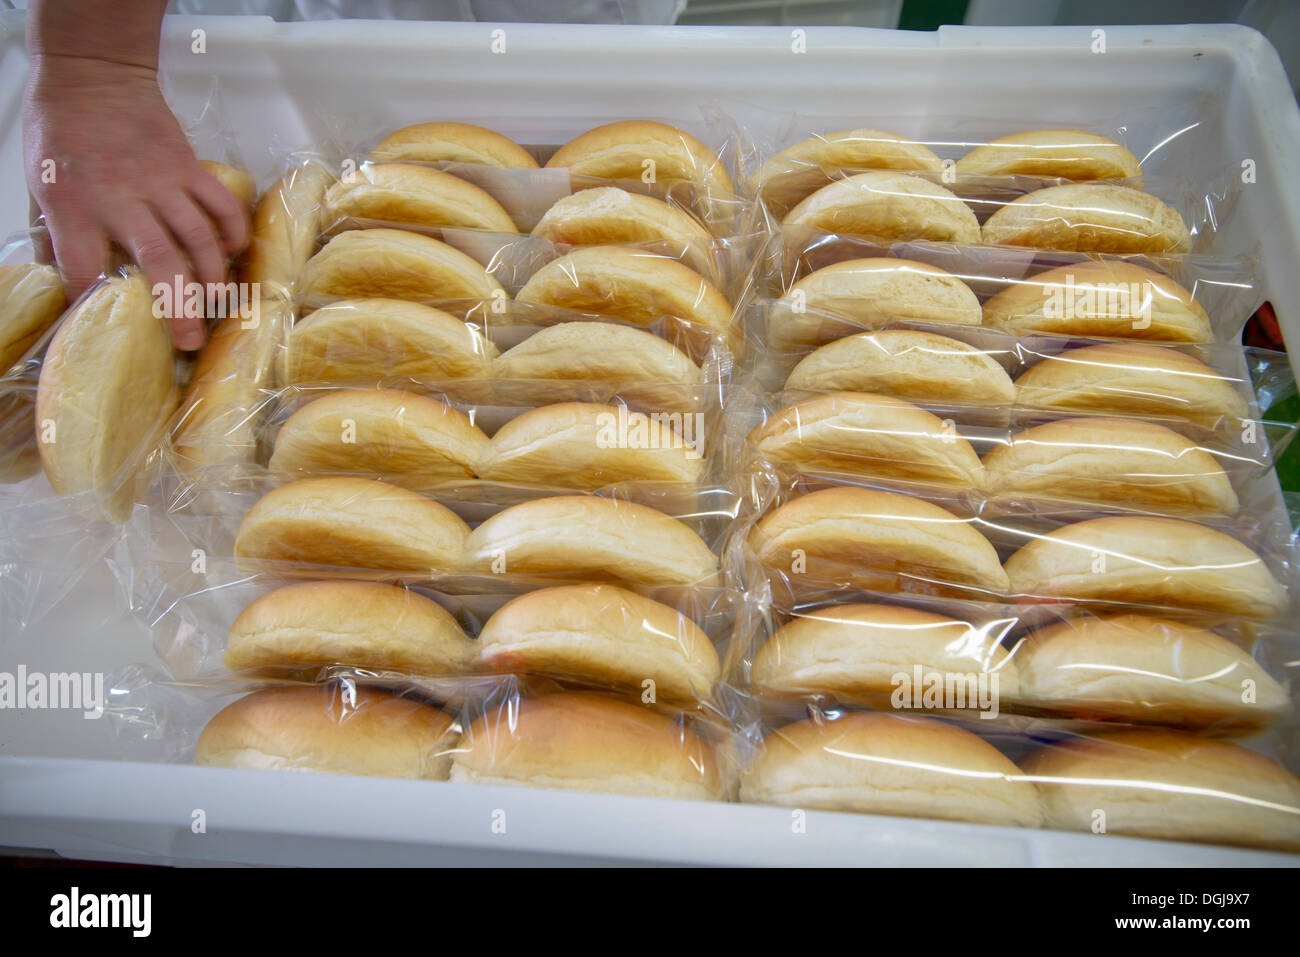 Bread rolls packed and arranged in box Stock Photo